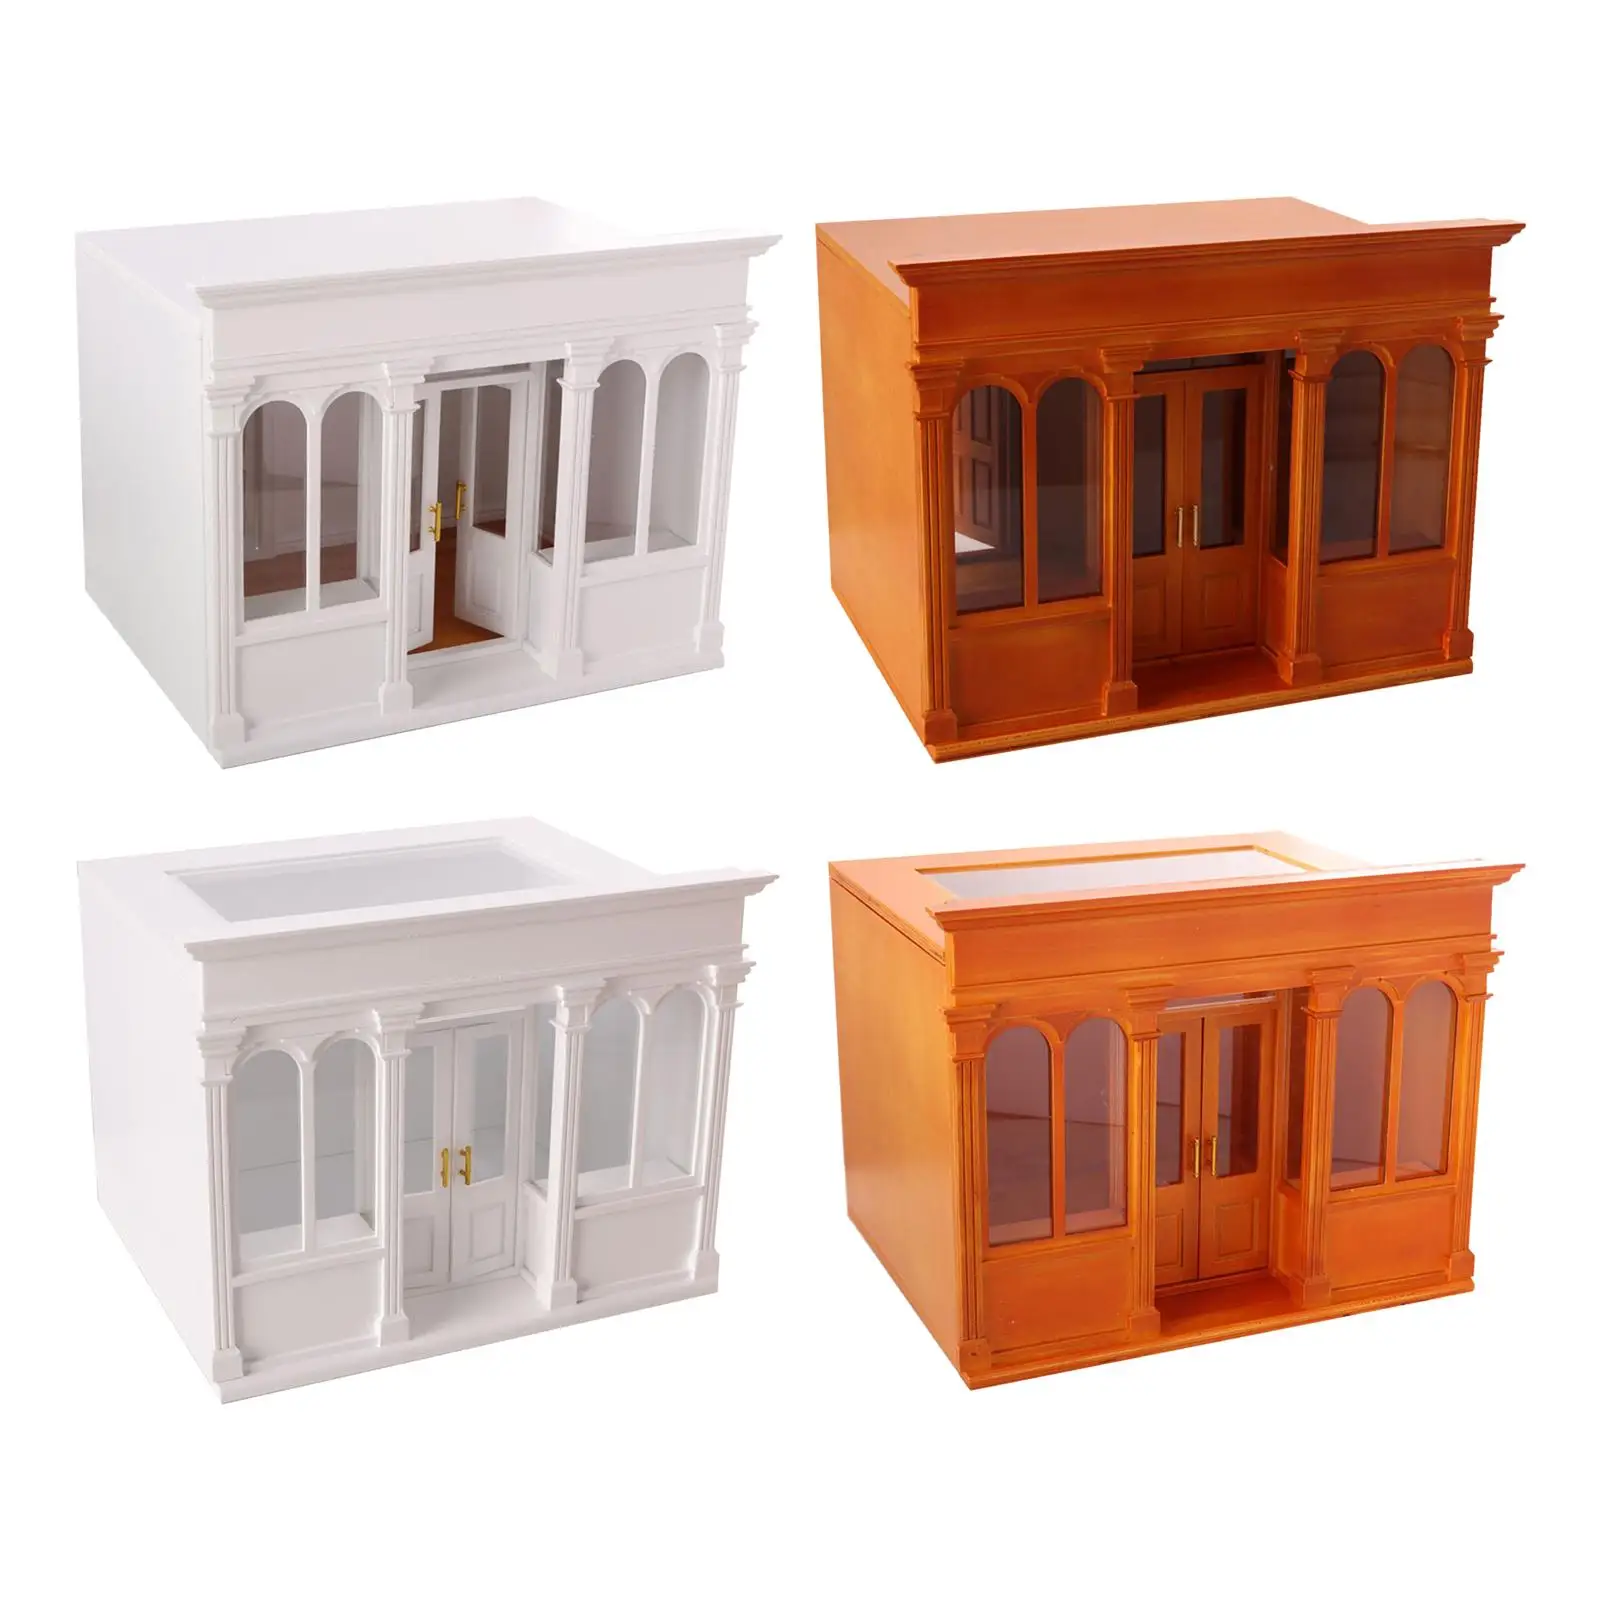 

1/12 Dollhouse Mini Wooden House Create Your Own Dollhouse with Double Opening Door for Miniature Scene Dollhouse Pretend Toy